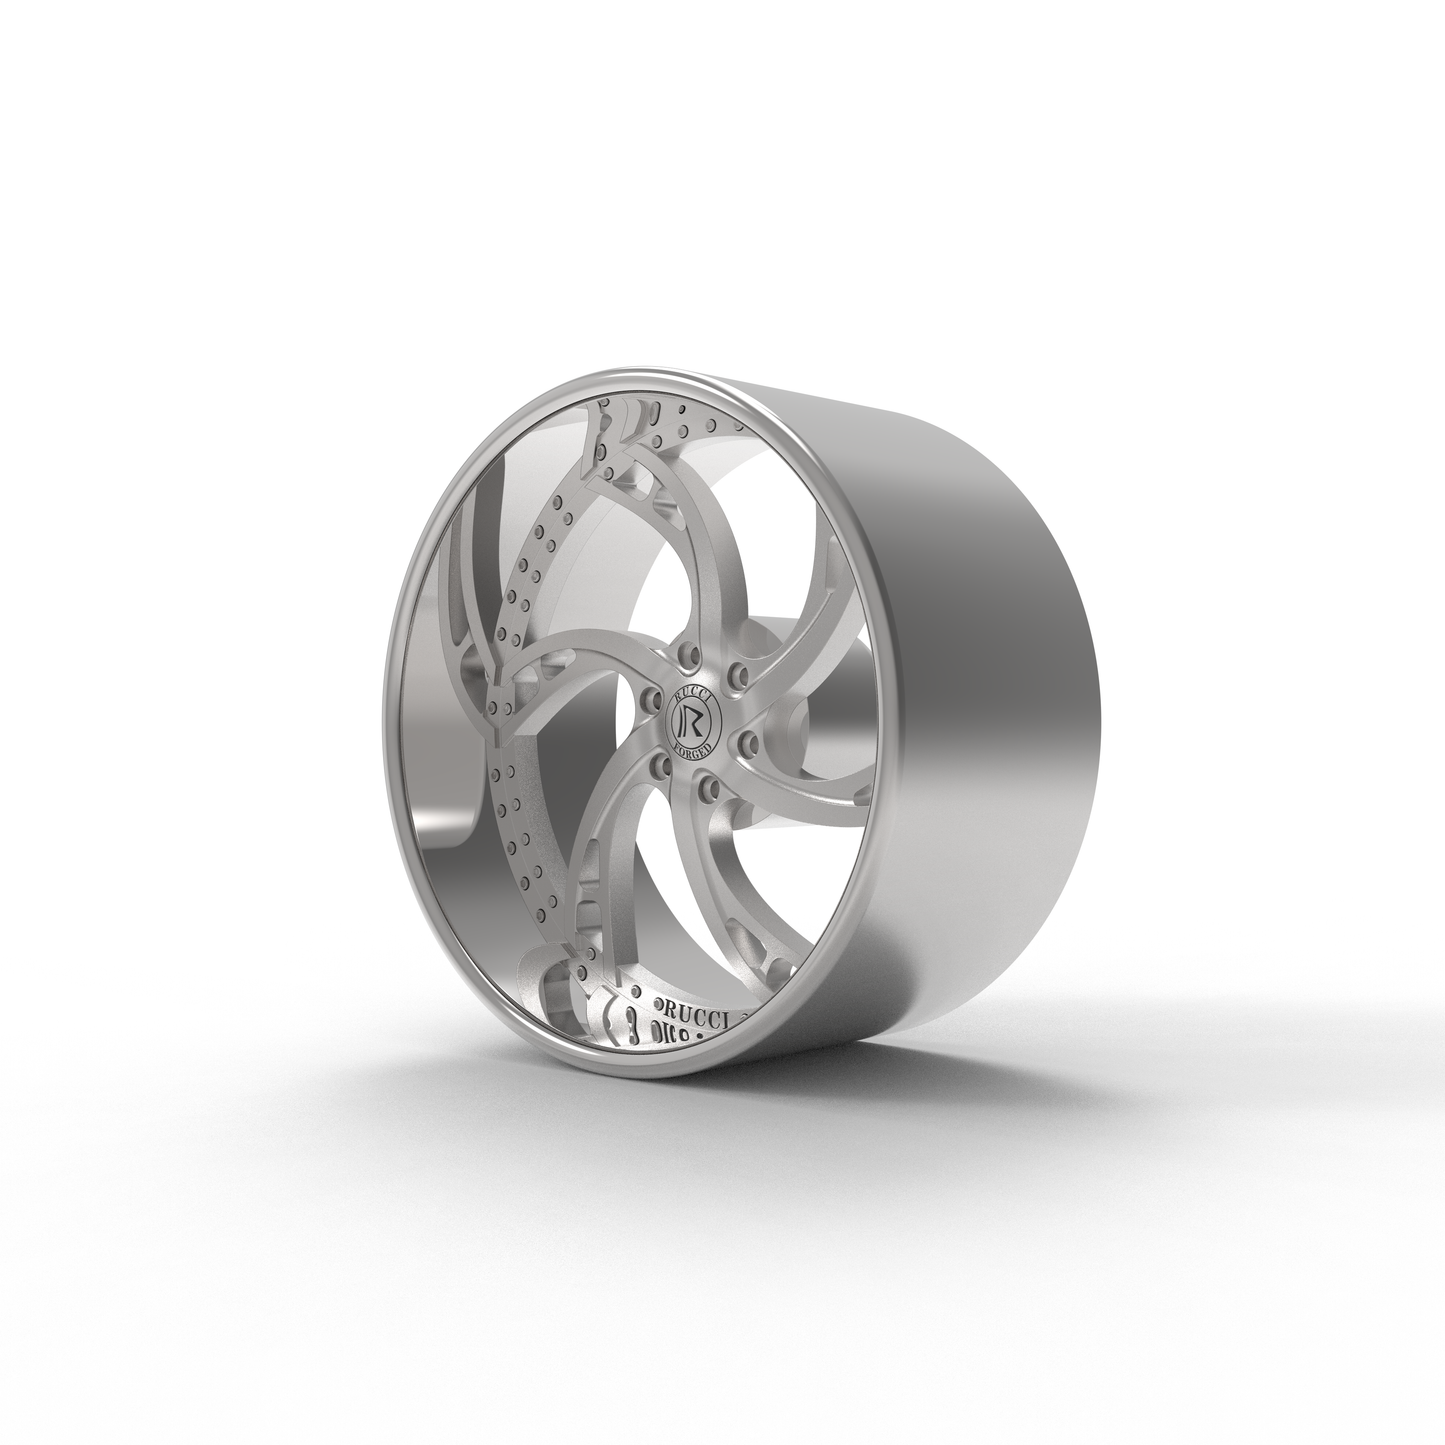 RUCCI FORGED BANKS WHEEL 3D MODEL